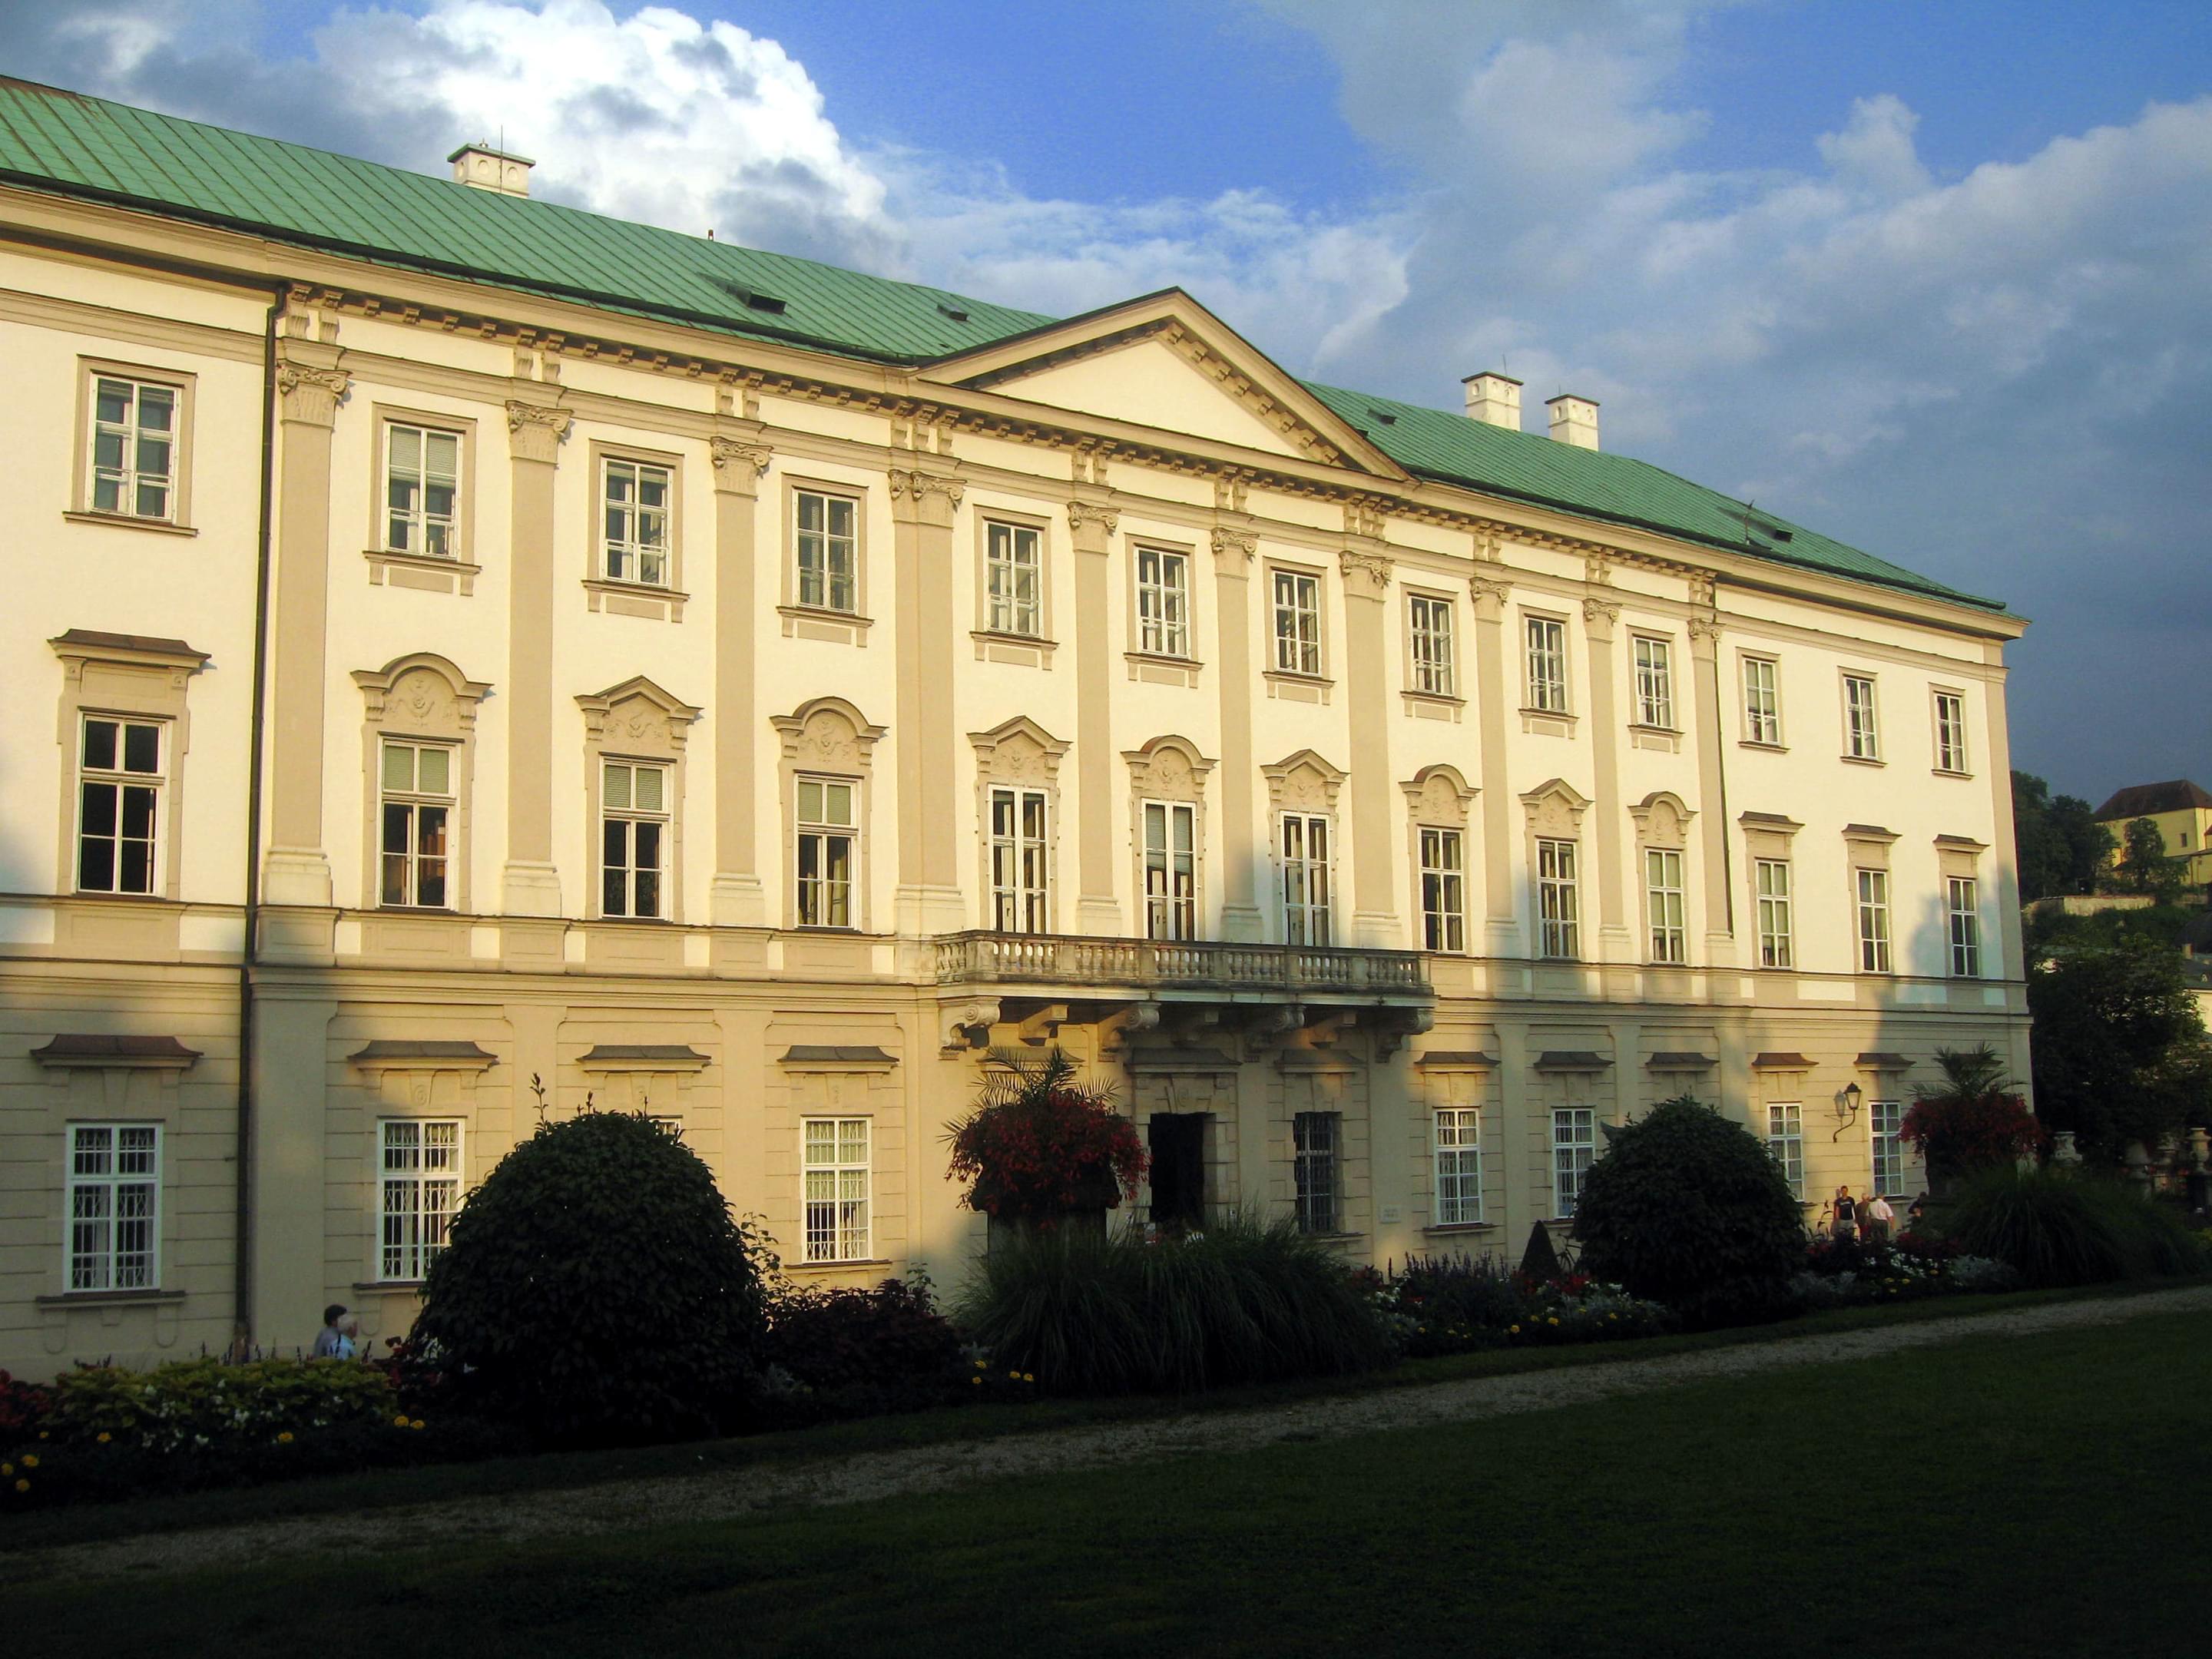 Mirabell Palace Overview